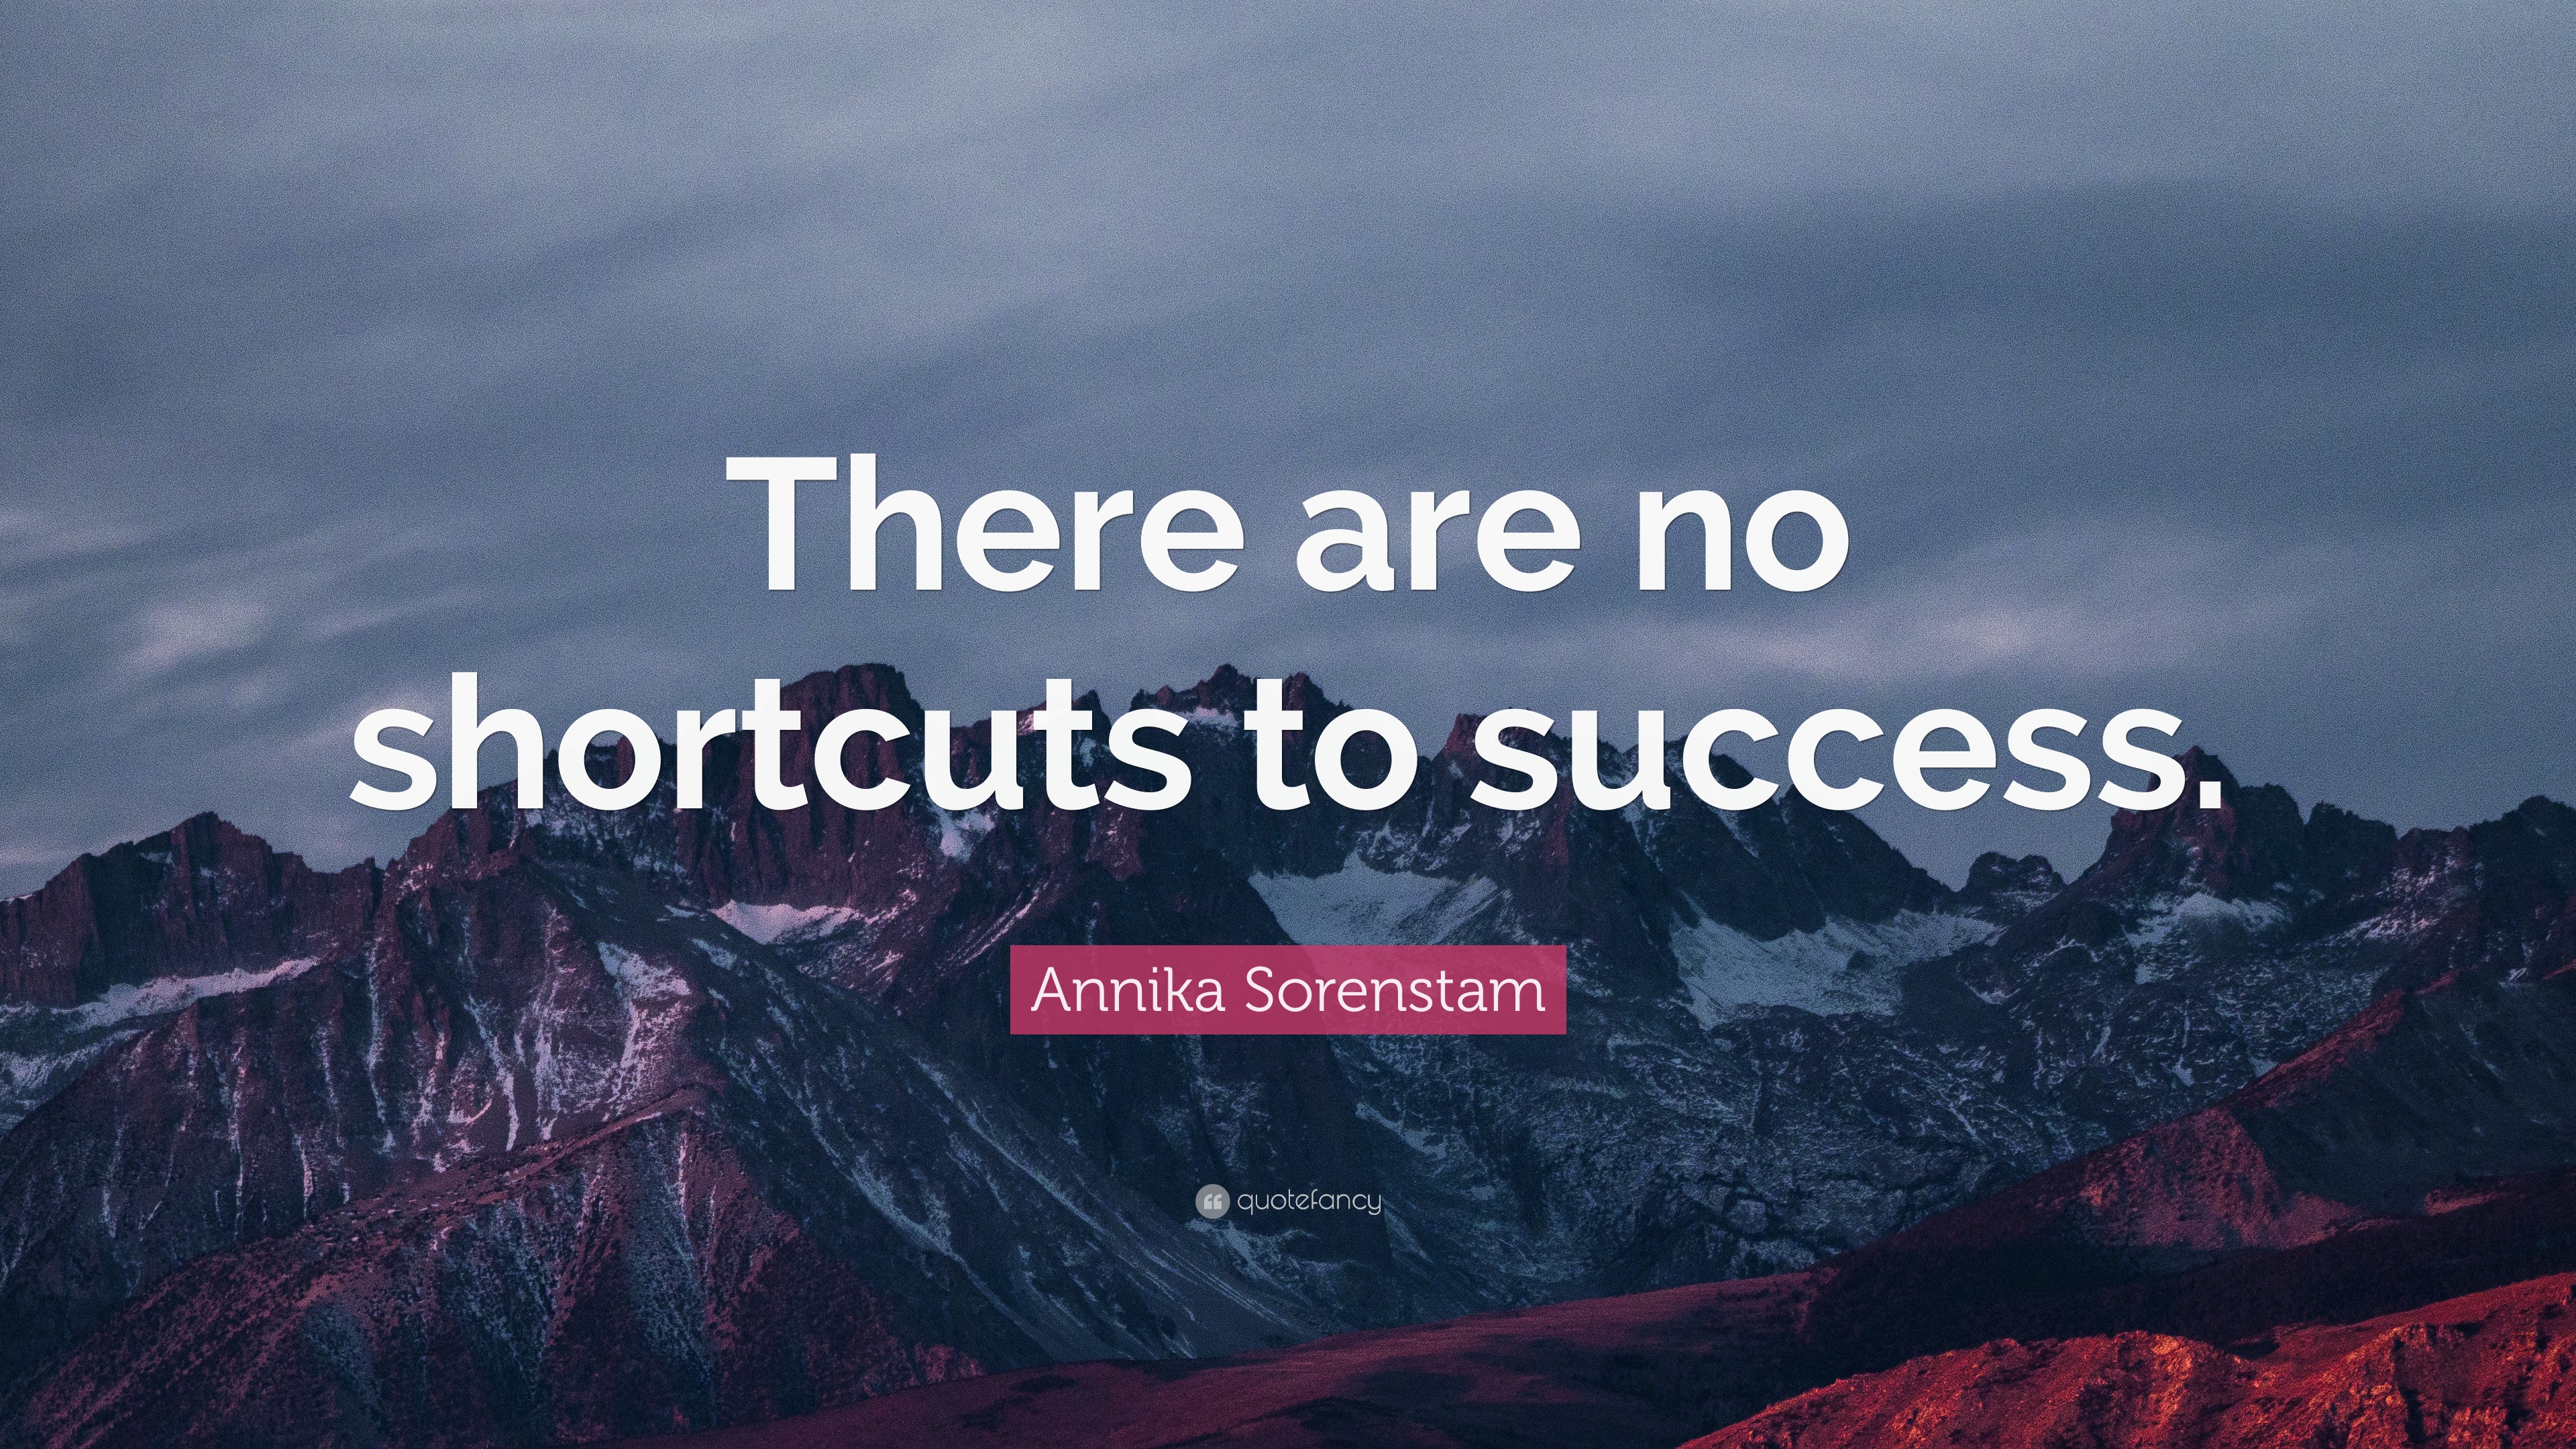 there is no shortcut to success essay 100 words